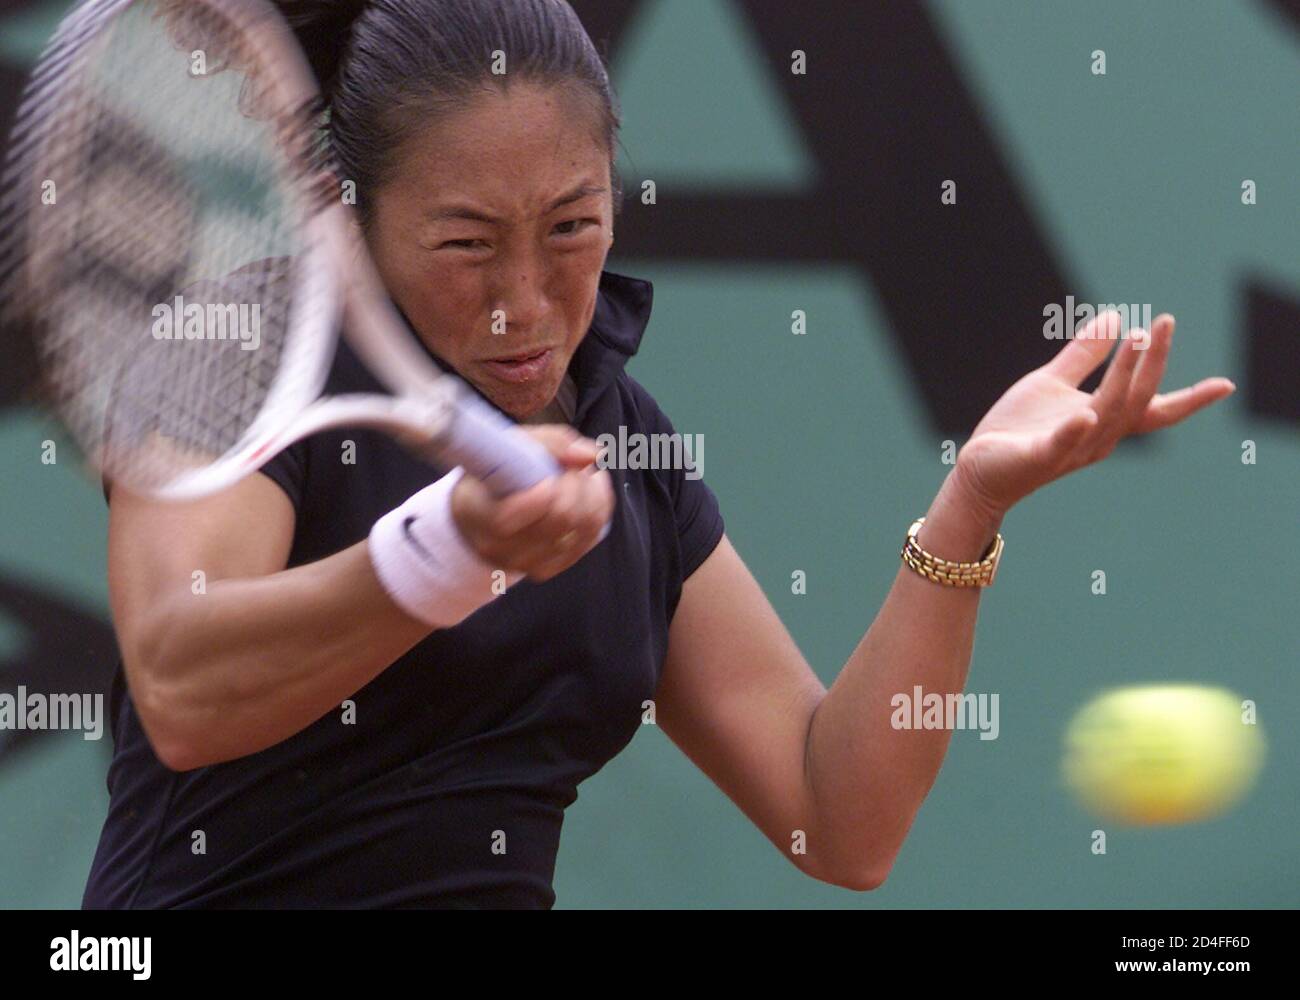 Marion Bartoli of France returns a forehand to Ai Sugiyama of Japan during  their match at the French tennis open at Roland Garros stadium in Paris May  28, 2002. REUTERS/Vincent Kessler VK/CRB